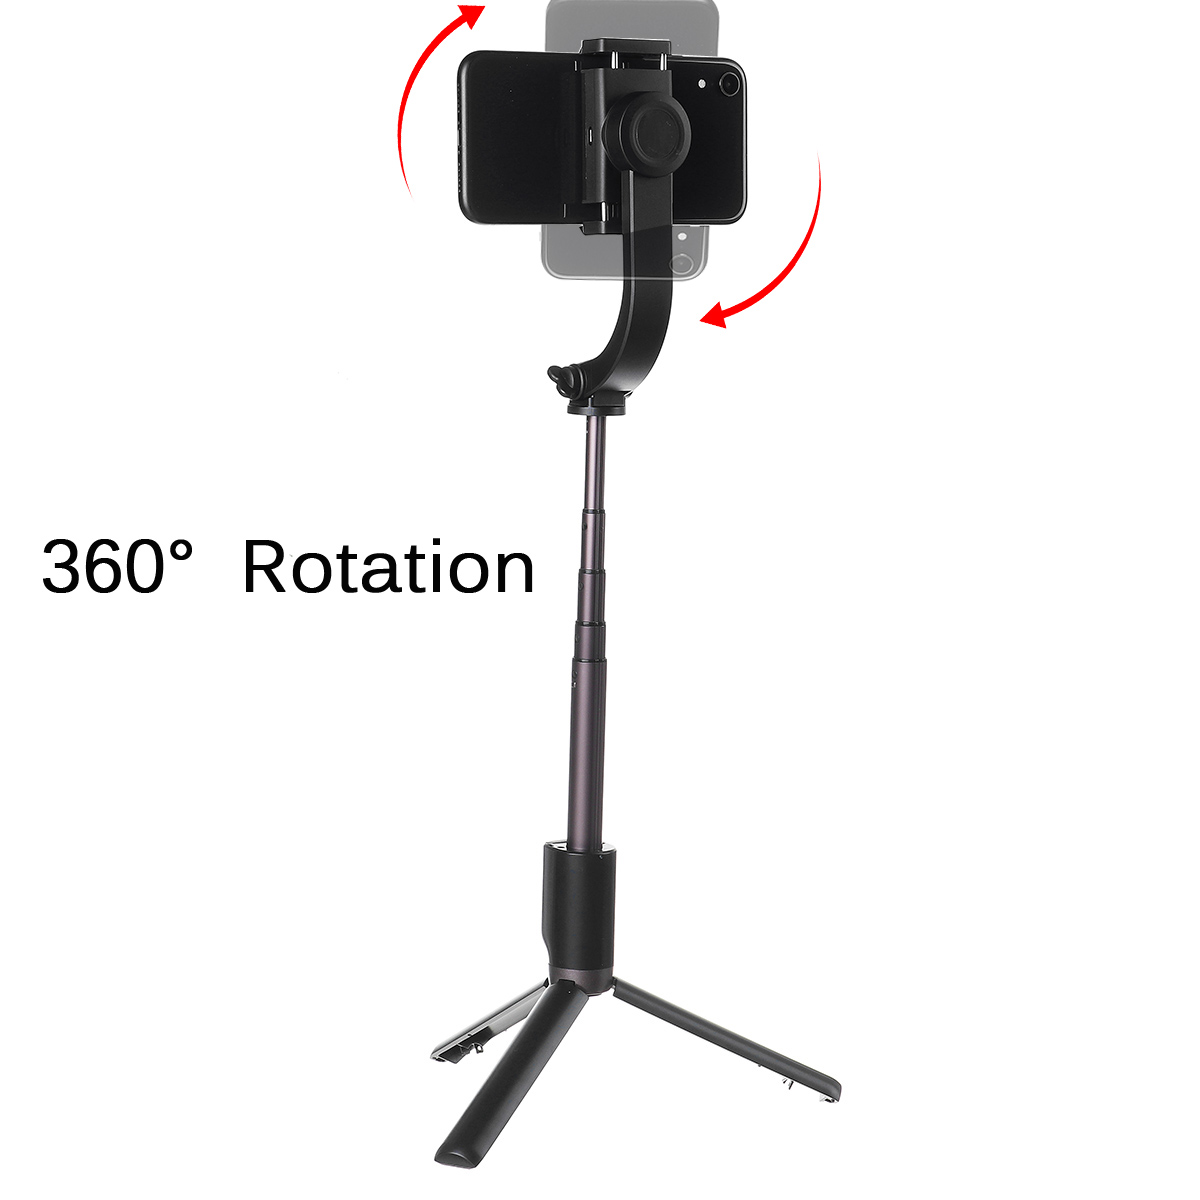 R15-Extended-Telescopic-bluetooth-Wireless-Handheld-Stabilizer-Mobile-Phone-Holder-Stand-for-Outdoor-1822120-4